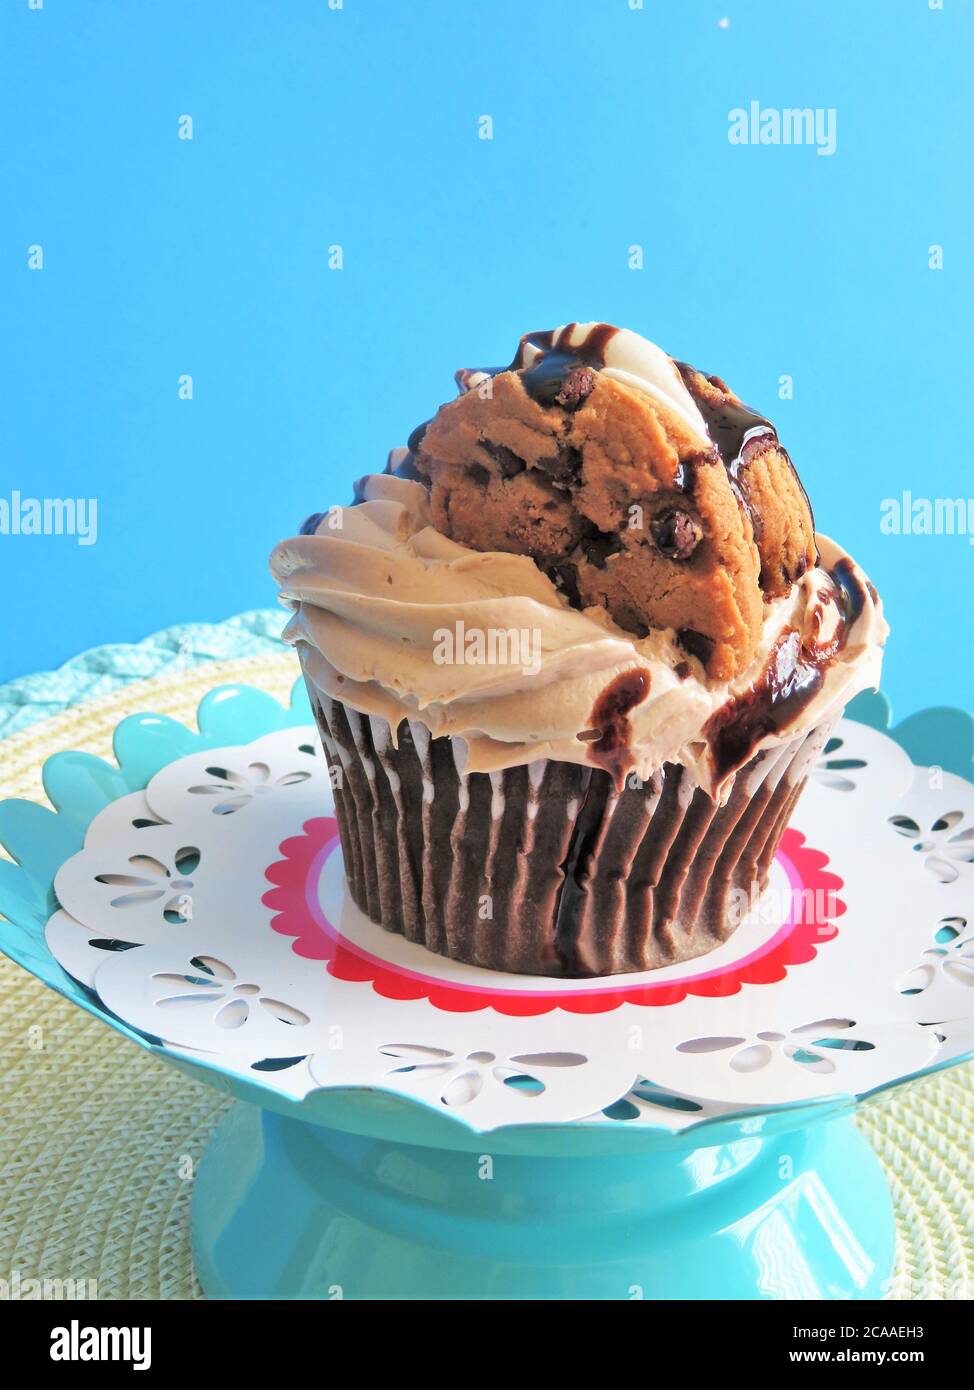 Chocolate cupcake with chocolate frosting and chocolate syrup Stock Photo